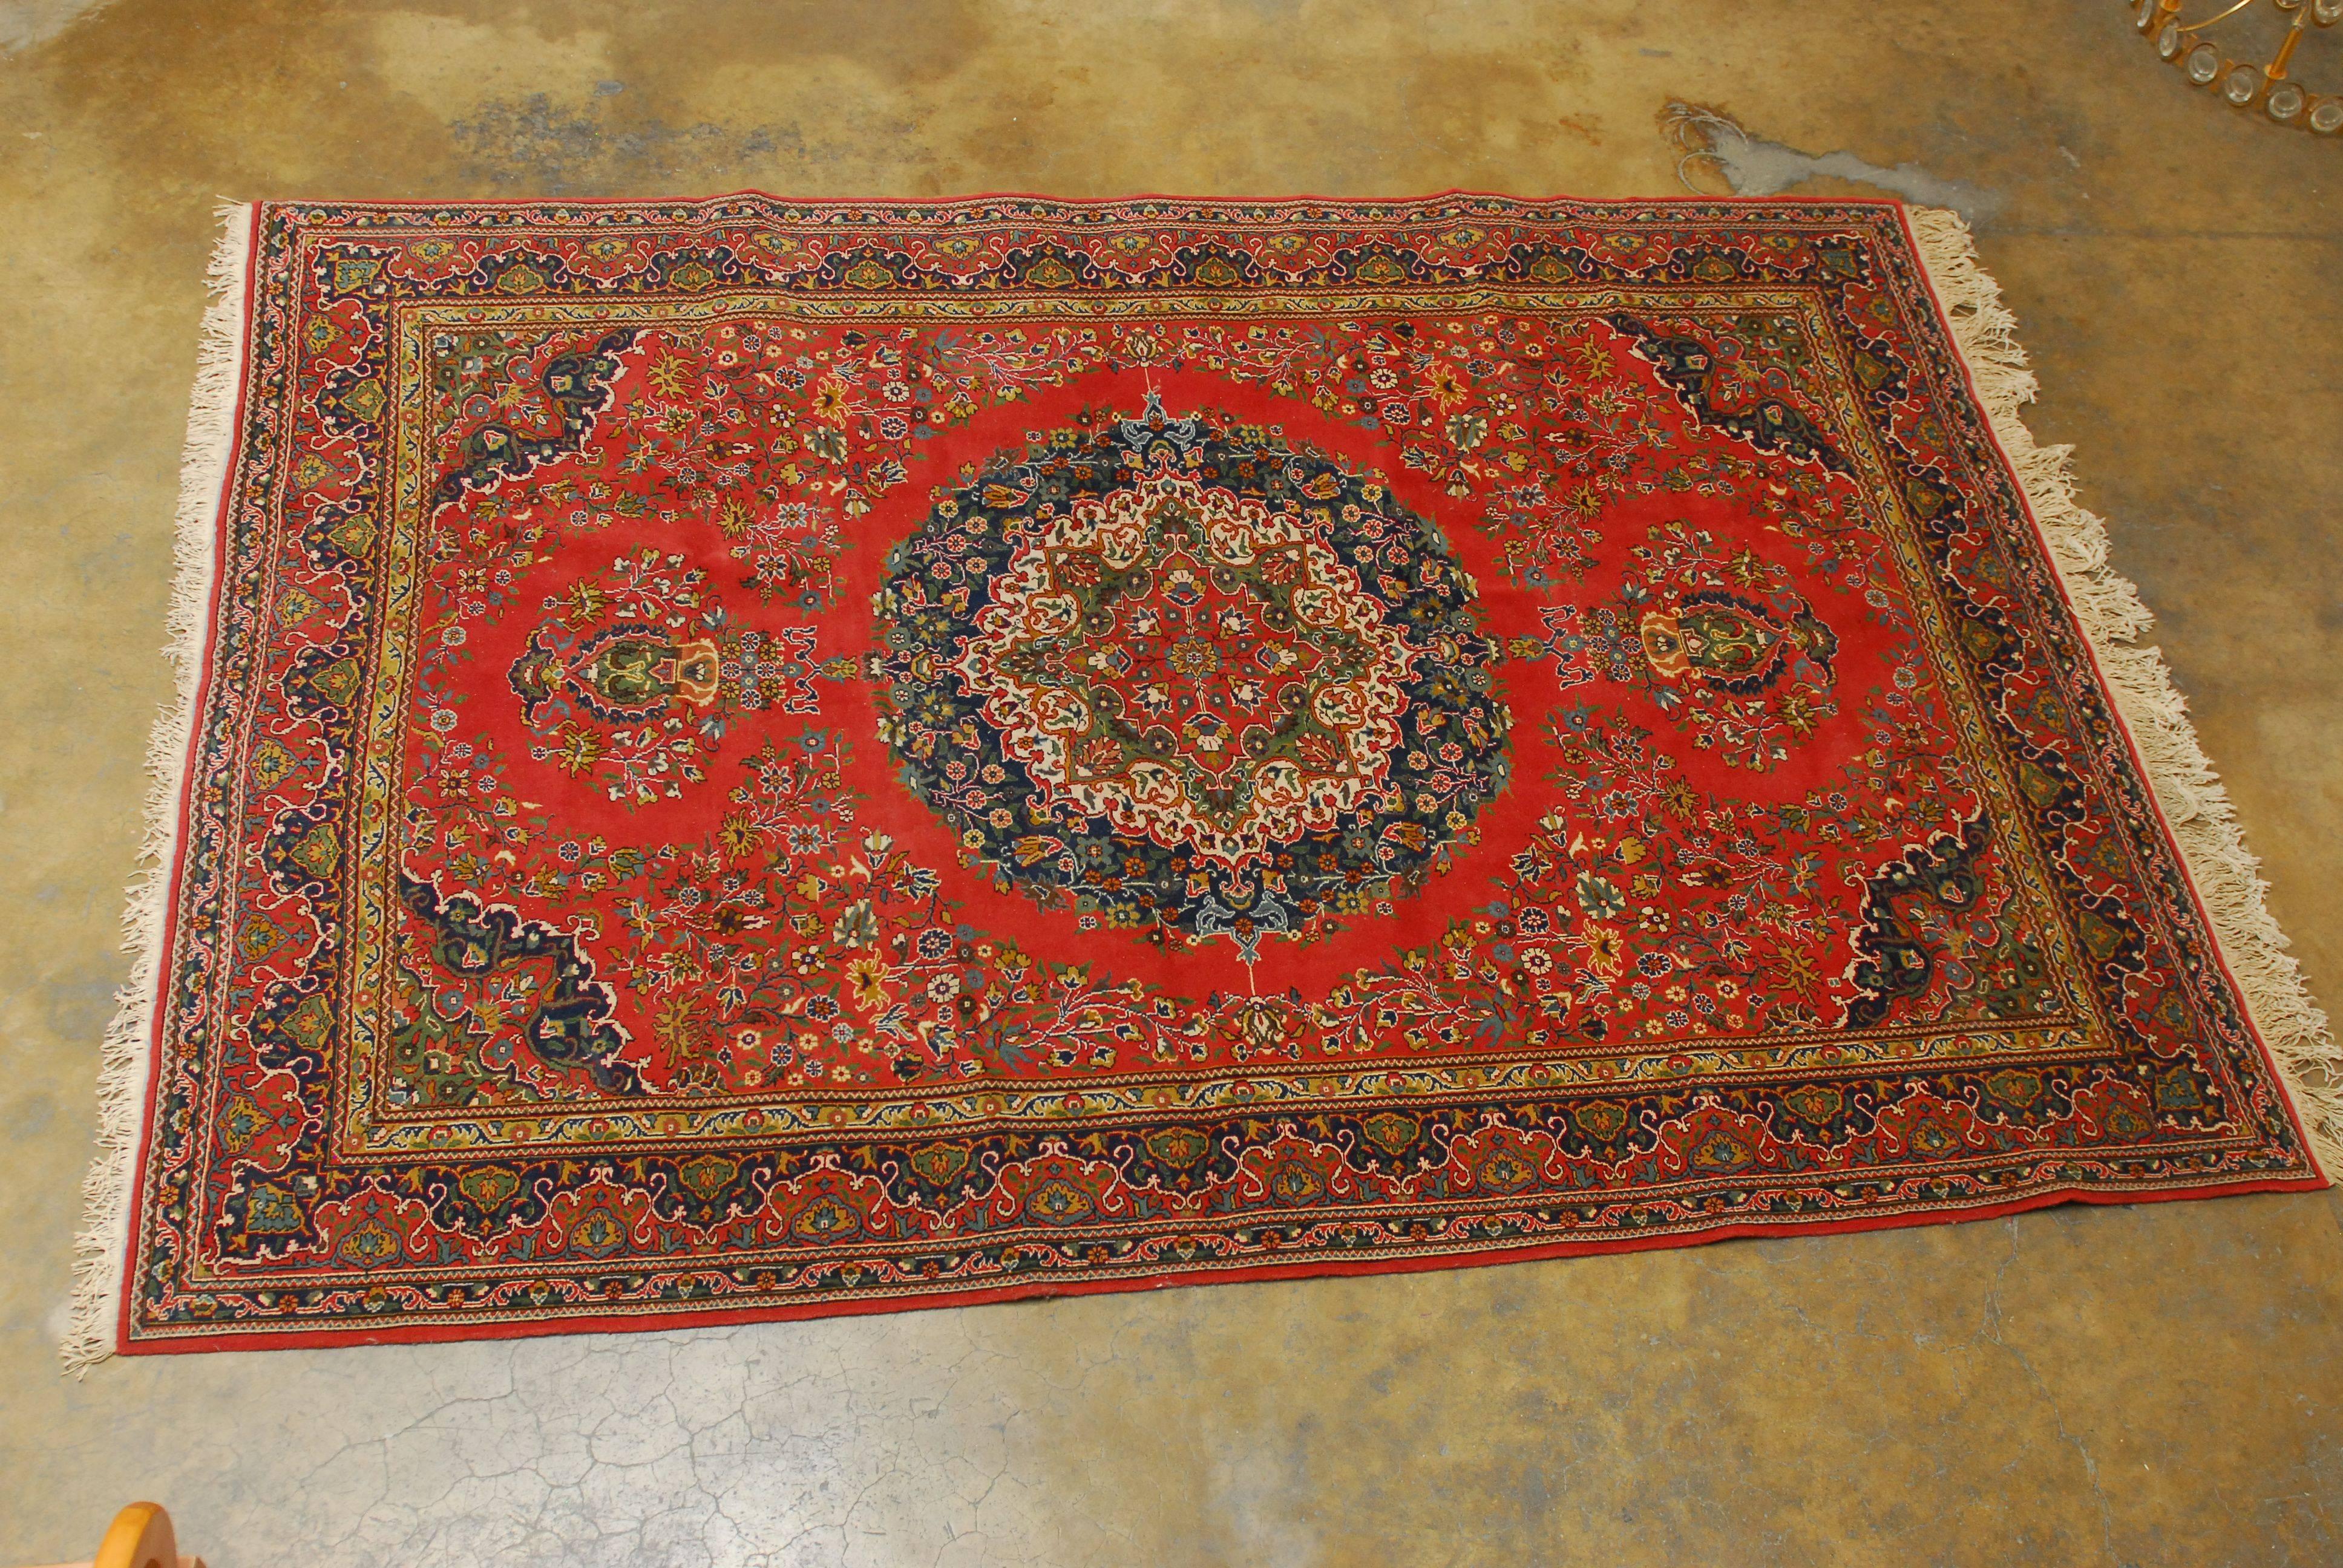 This beautiful Turkish rug has a formal central medallion in deep indigo blue and cream with intricate floral patterns over a crimson background. The field is also heavily adorned with floral vines and the carpet has a multi-band border.
